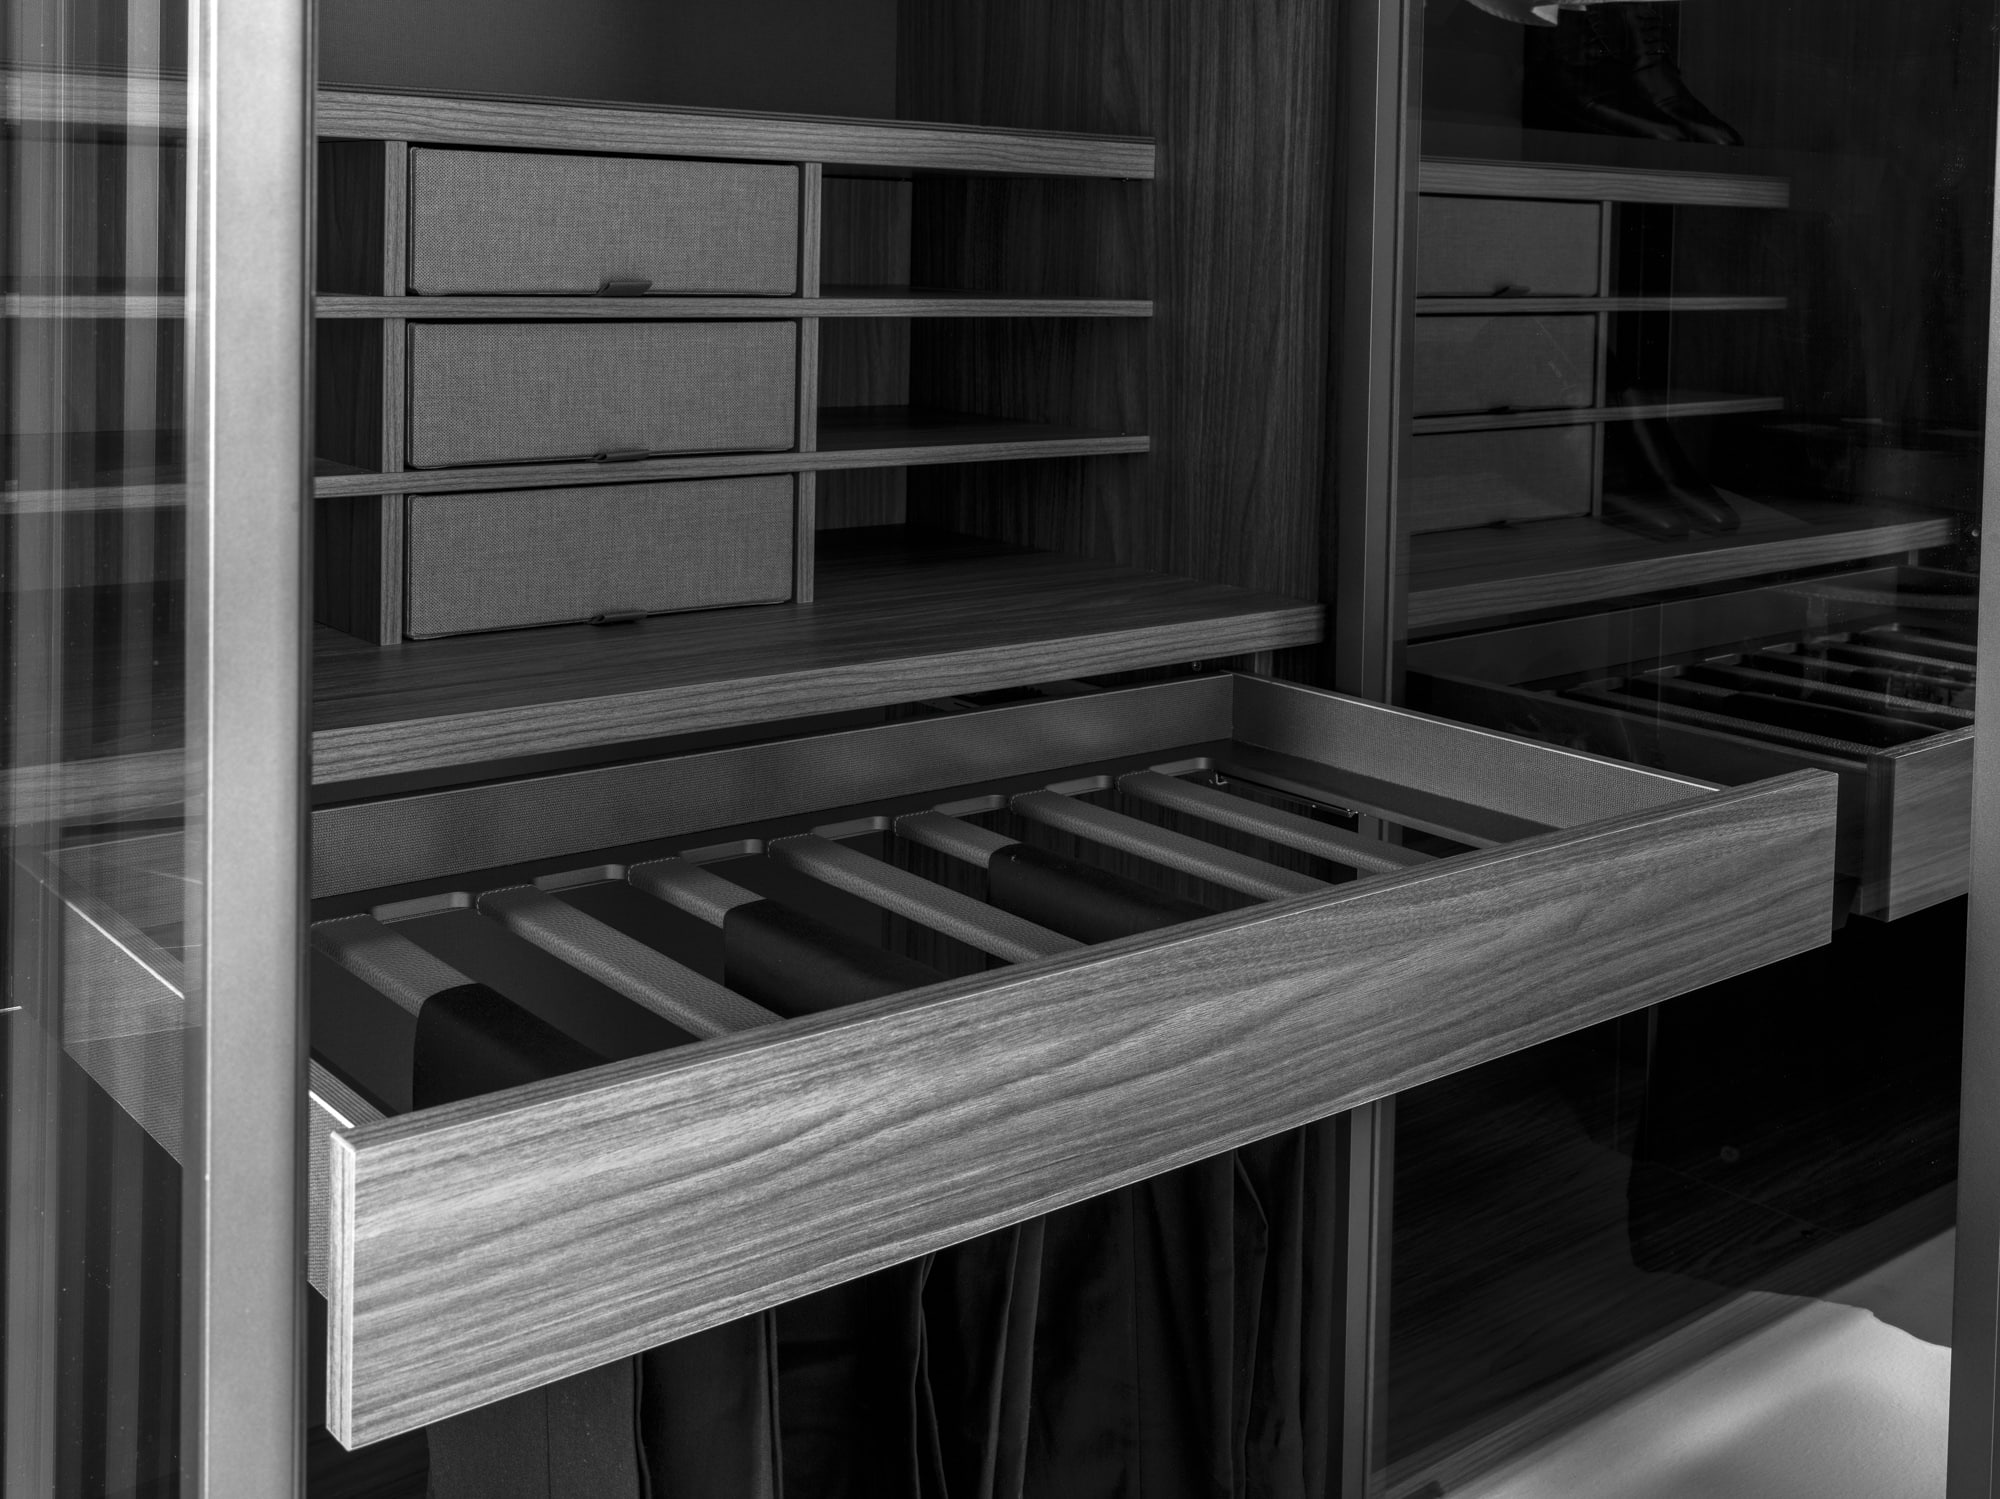 Full pull-out drawer with trousers rack. The rack features an Easy leather finish that prevents trousers from falling.